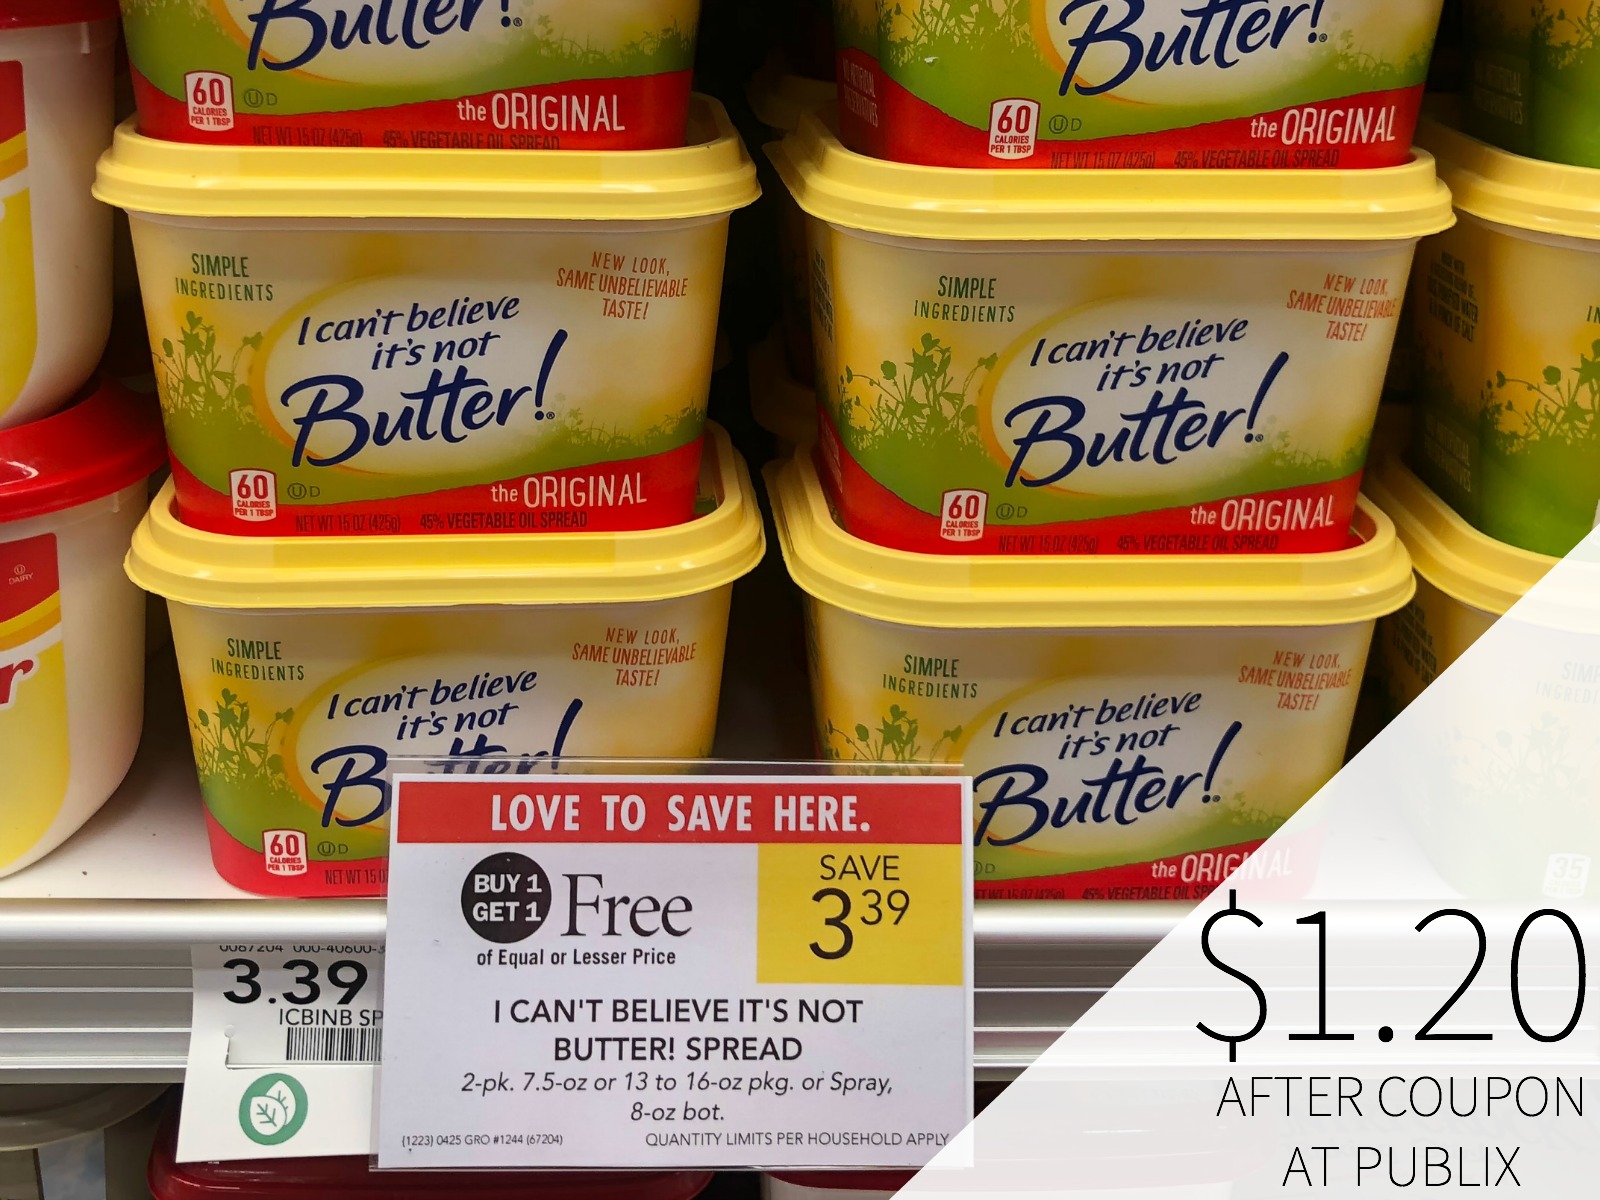 Get I Can’t Believe It’s Not Butter!® As Low As $1.20 This Week At Publix